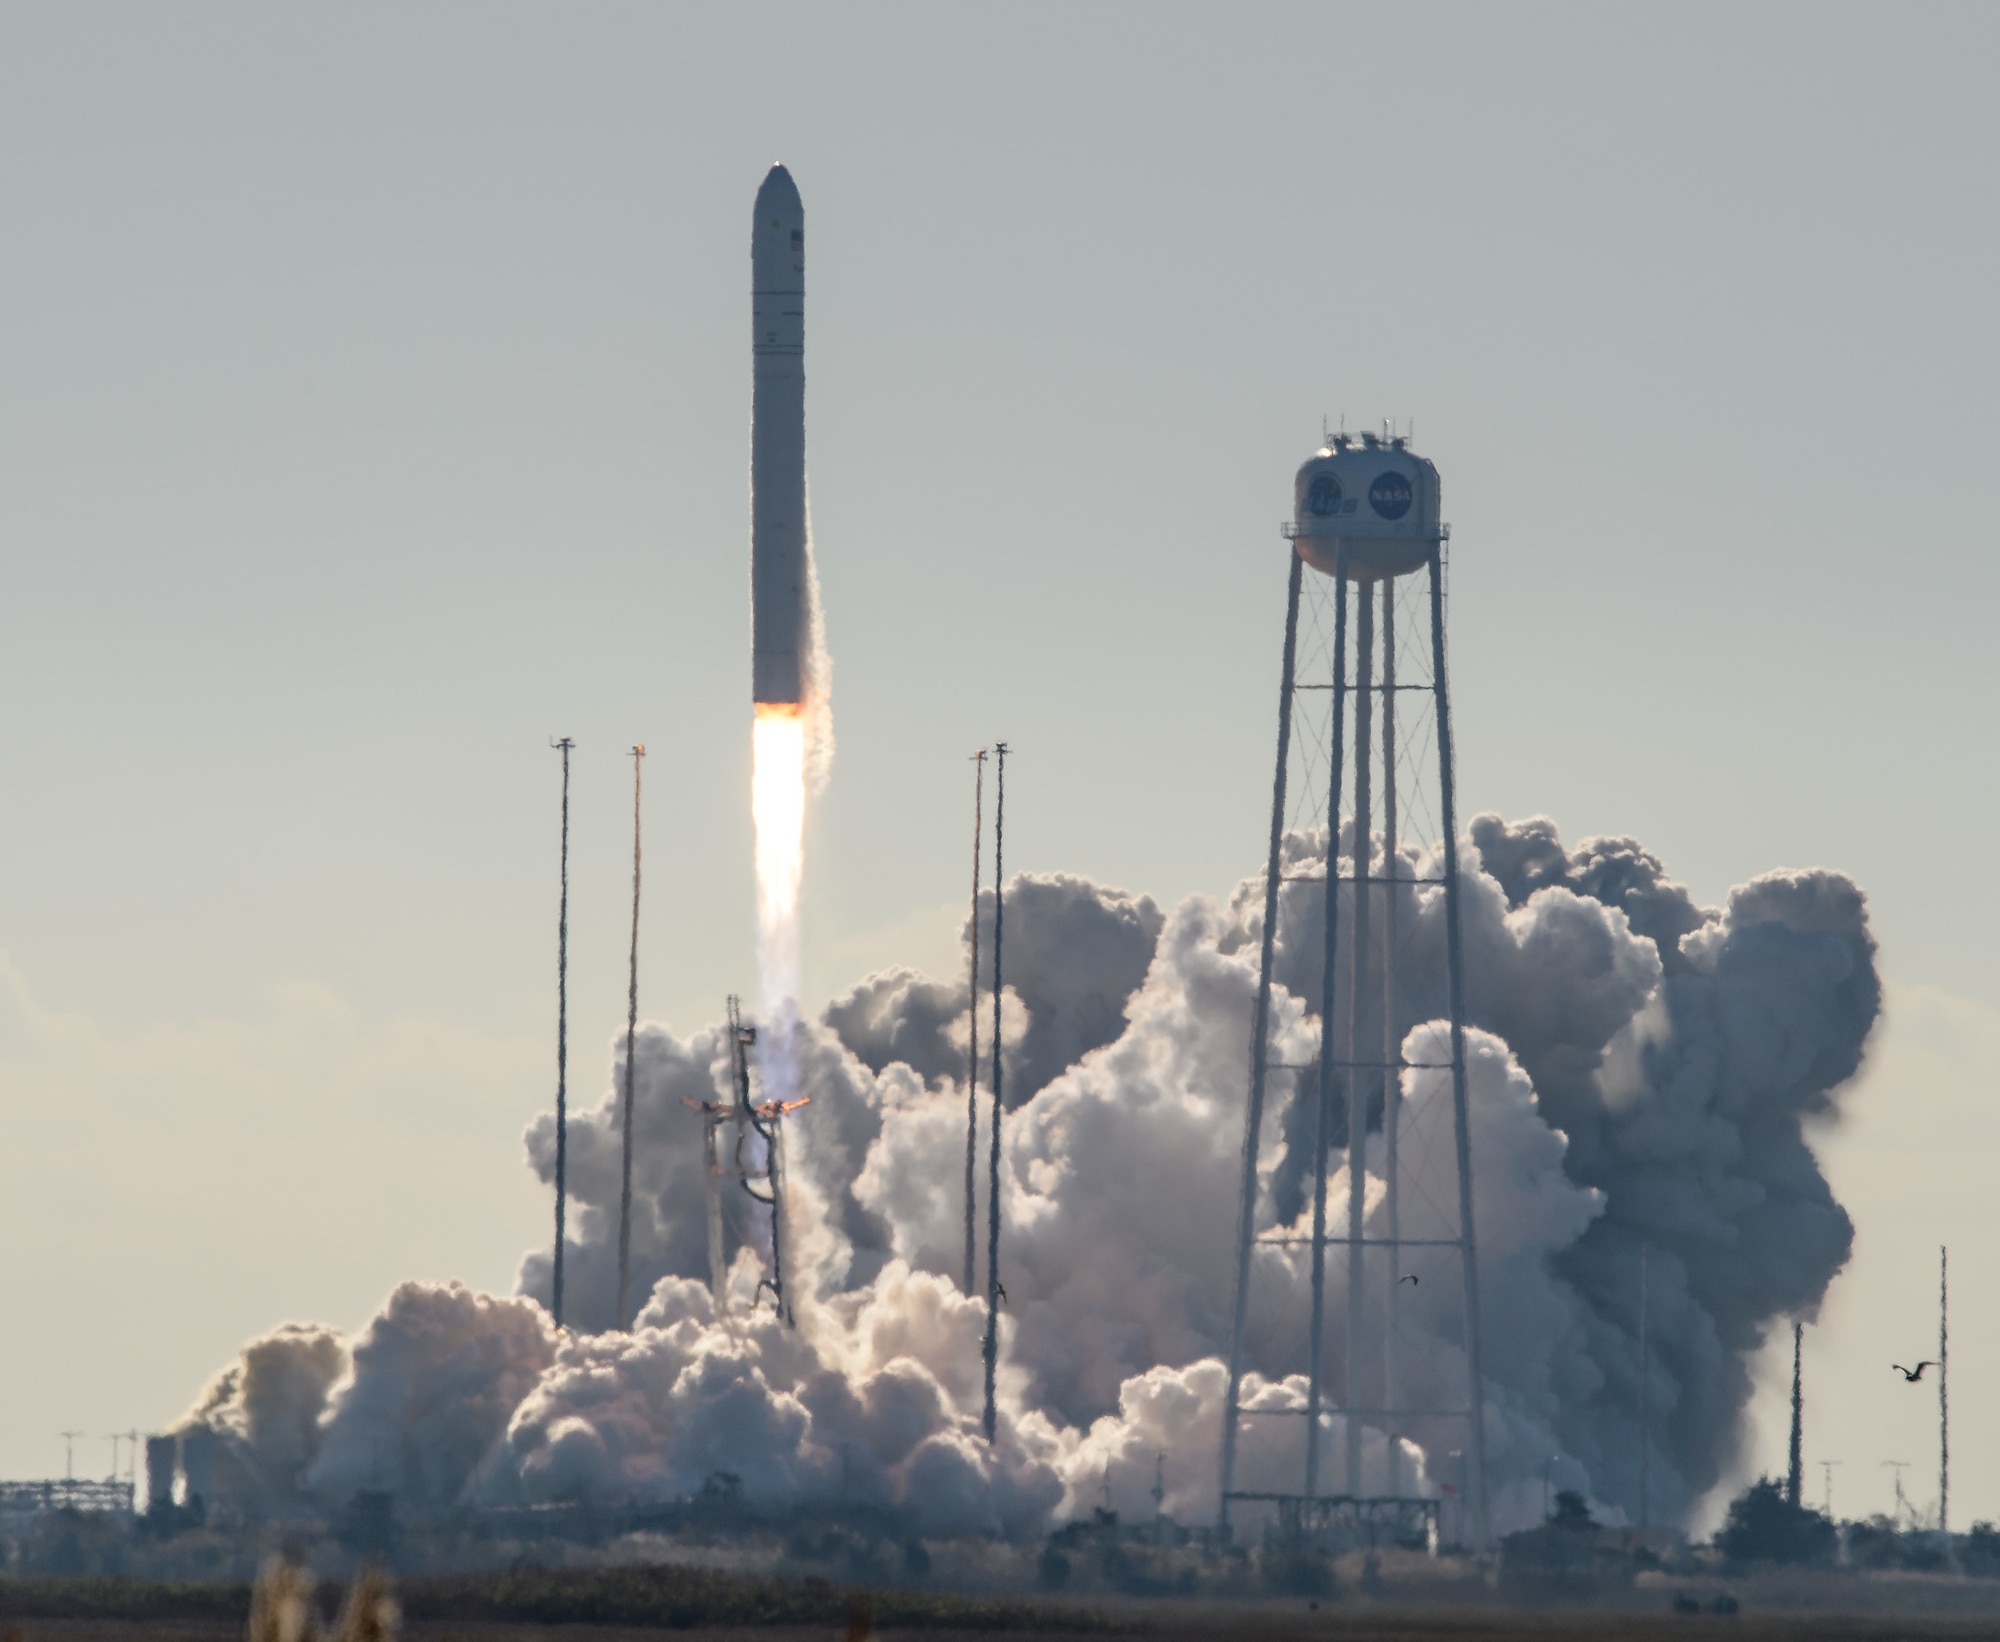 The Cygnus NG-12 cargo spacecraft, S.S. Alan Bean, launches from the Mid-Atlantic Regional Spaceport’s Pad 0A at NASA’s Wallops Flight Facility in Virginia aboard an upgraded Northrop Grumman Innovation Systems Antares 230+ rocket at 9:59 a.m. EDT Saturday, Nov. 2, 2019. On board the two-day flight to the International Space Station are the Aerospace Rogue Alpha/Beta Cubesats, which have officially achieved their priority mission of developing a small low Earth orbit constellation in just 18 months for the Space and Missile Systems Center Development Corps at Los Angeles Air Force Base in El Segundo, California. The cubesats will collect data on cloud backgrounds to inform future low Earth orbit missions. The Air Force will also utilize this program’s data to investigate potential uses of the capability. (Image credit: Bill Ingalls/NASA)